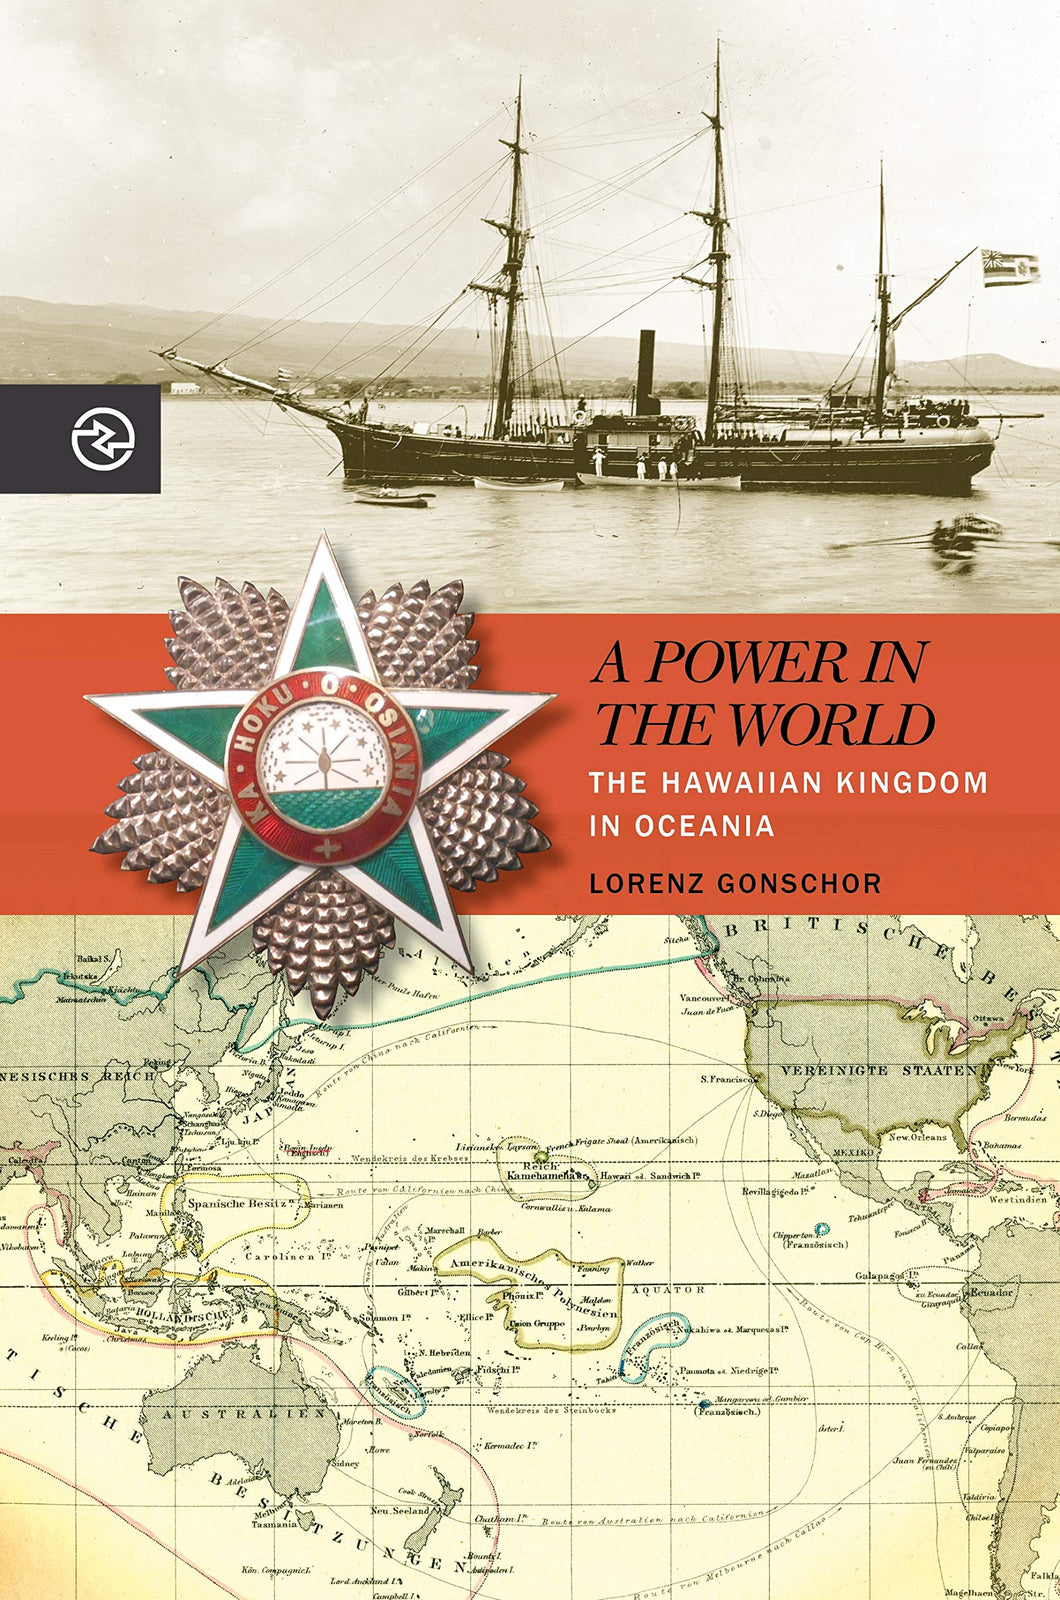 A Power In The World (Perspectives on the Global Past): The Hawaiian Kingdom in Oceania by Lorenz Gonschor